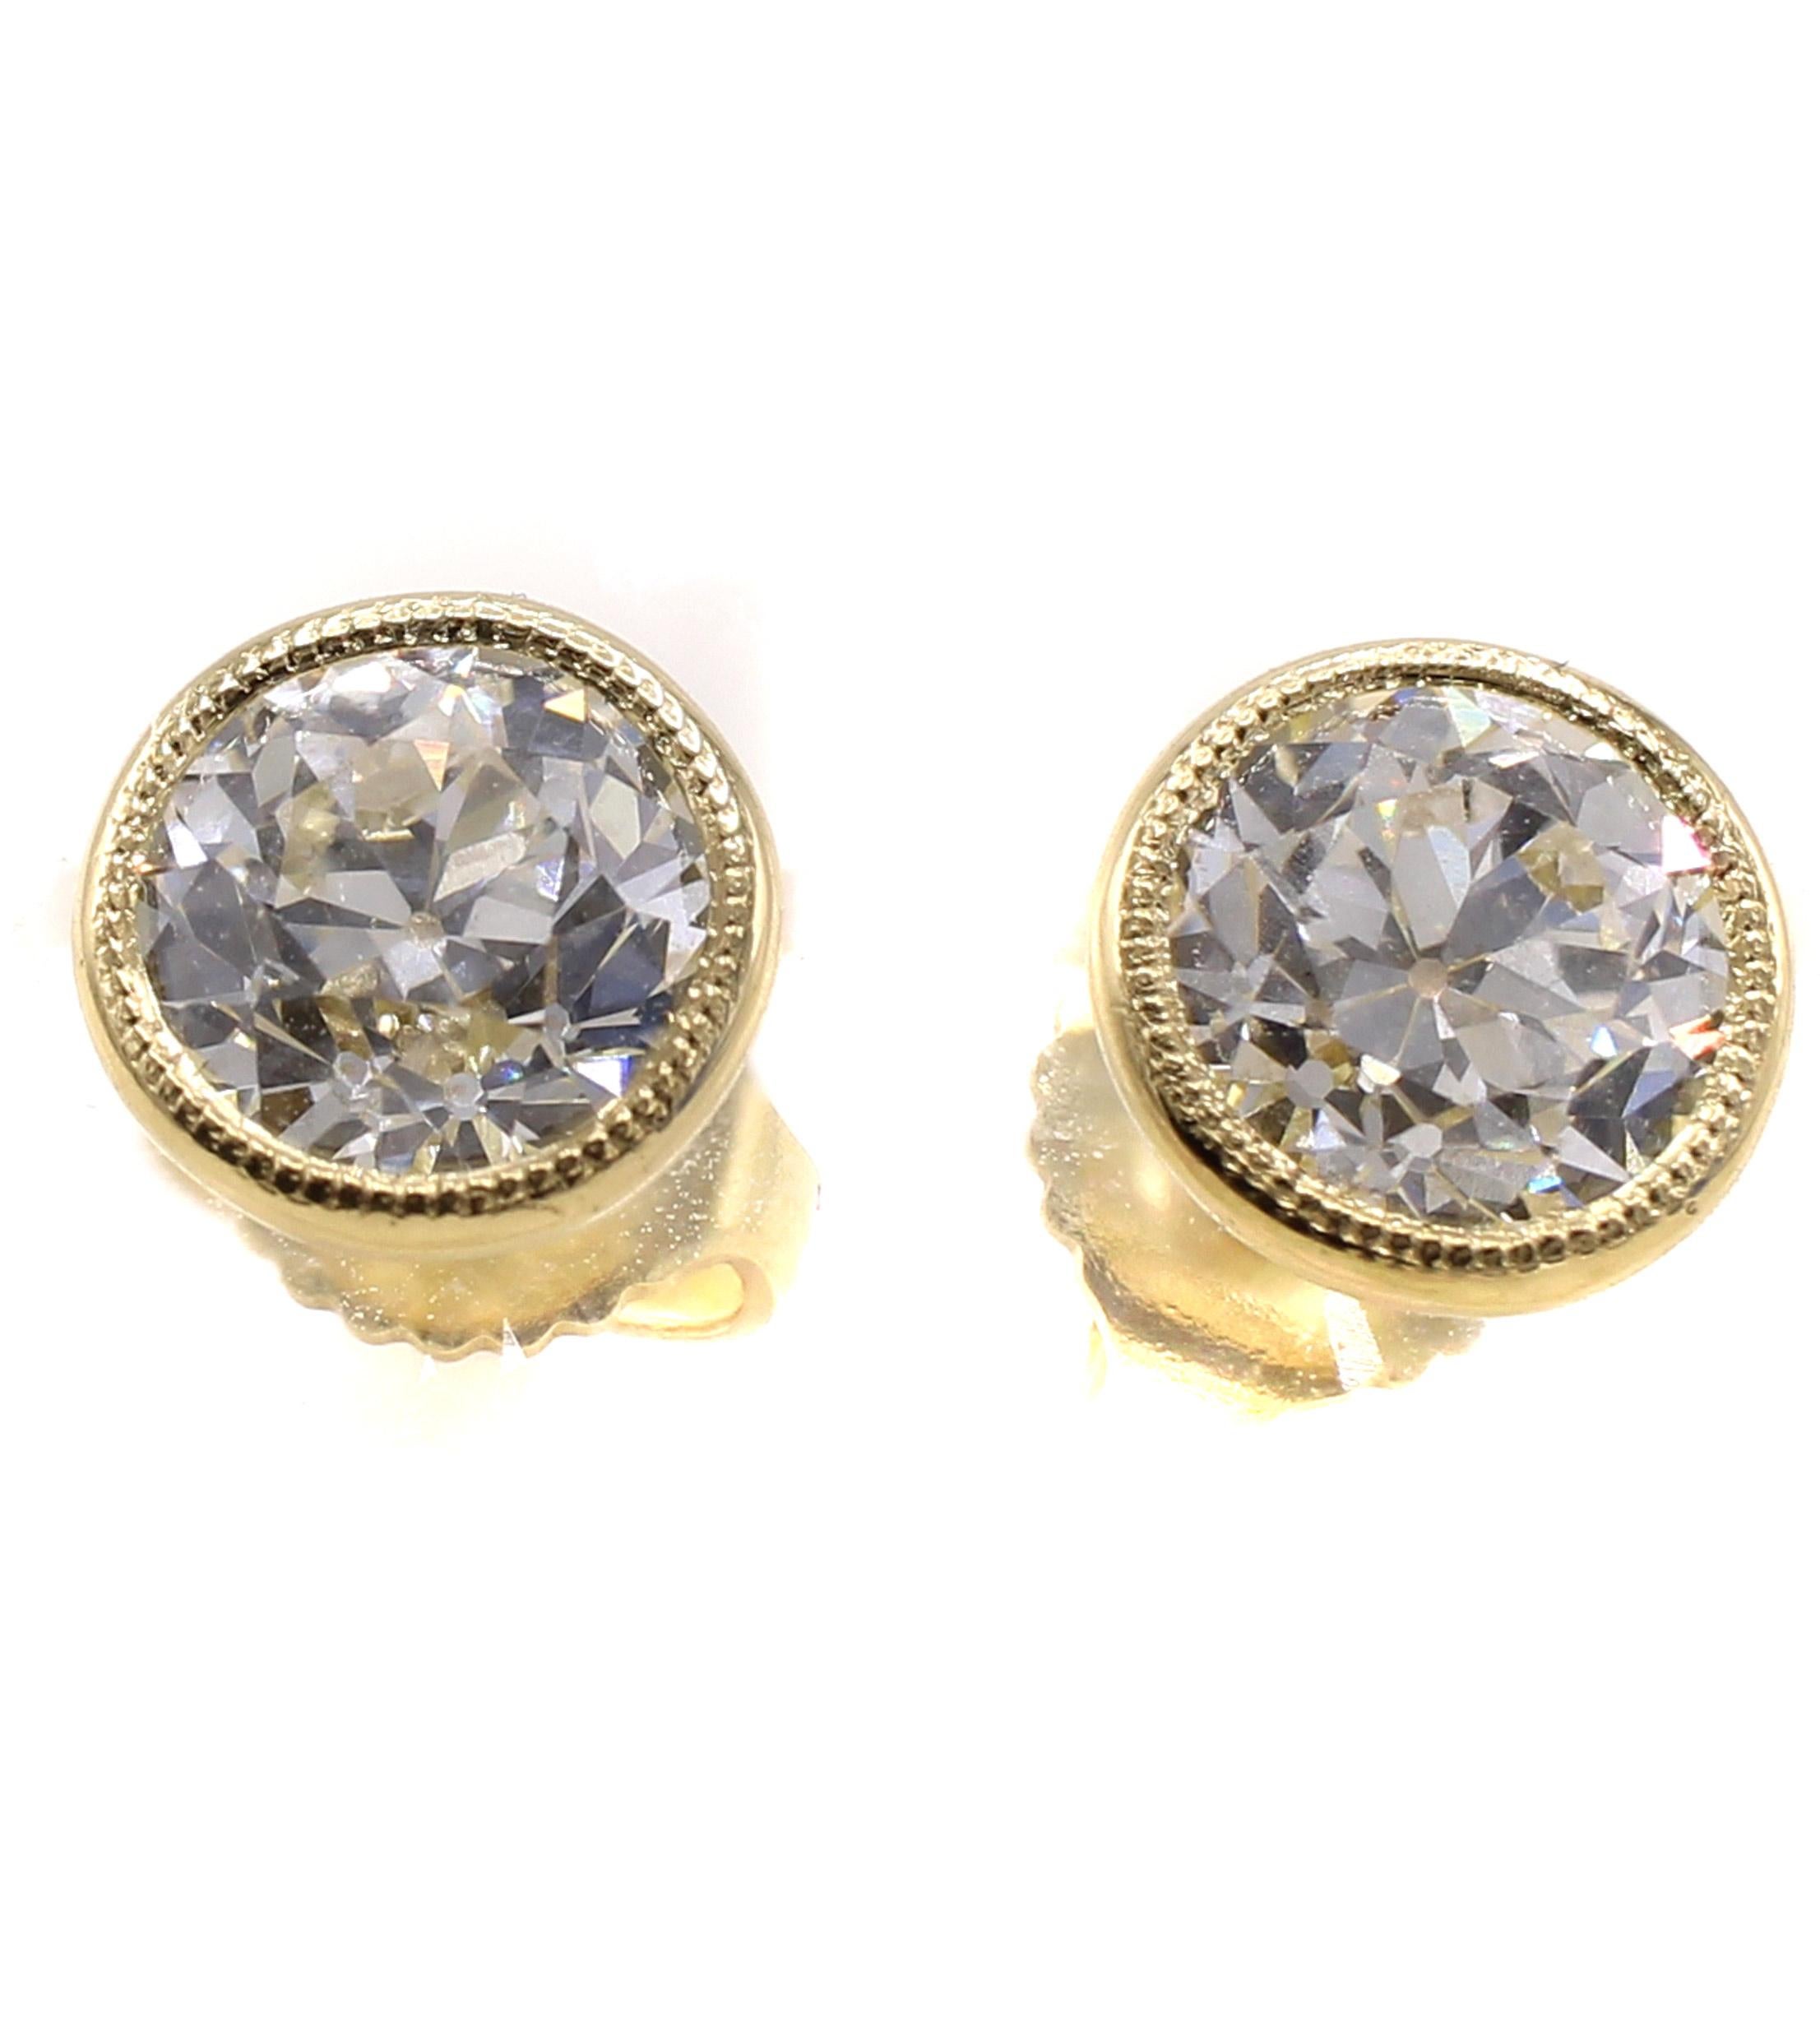 Two charming Old European Cut diamonds with a total weight of 2 carats have been set into these handcrafted 18 karat yellow gold bezel set mountings. The tops of the bezels have fine milligrain work combining the new world with the old cuts from a